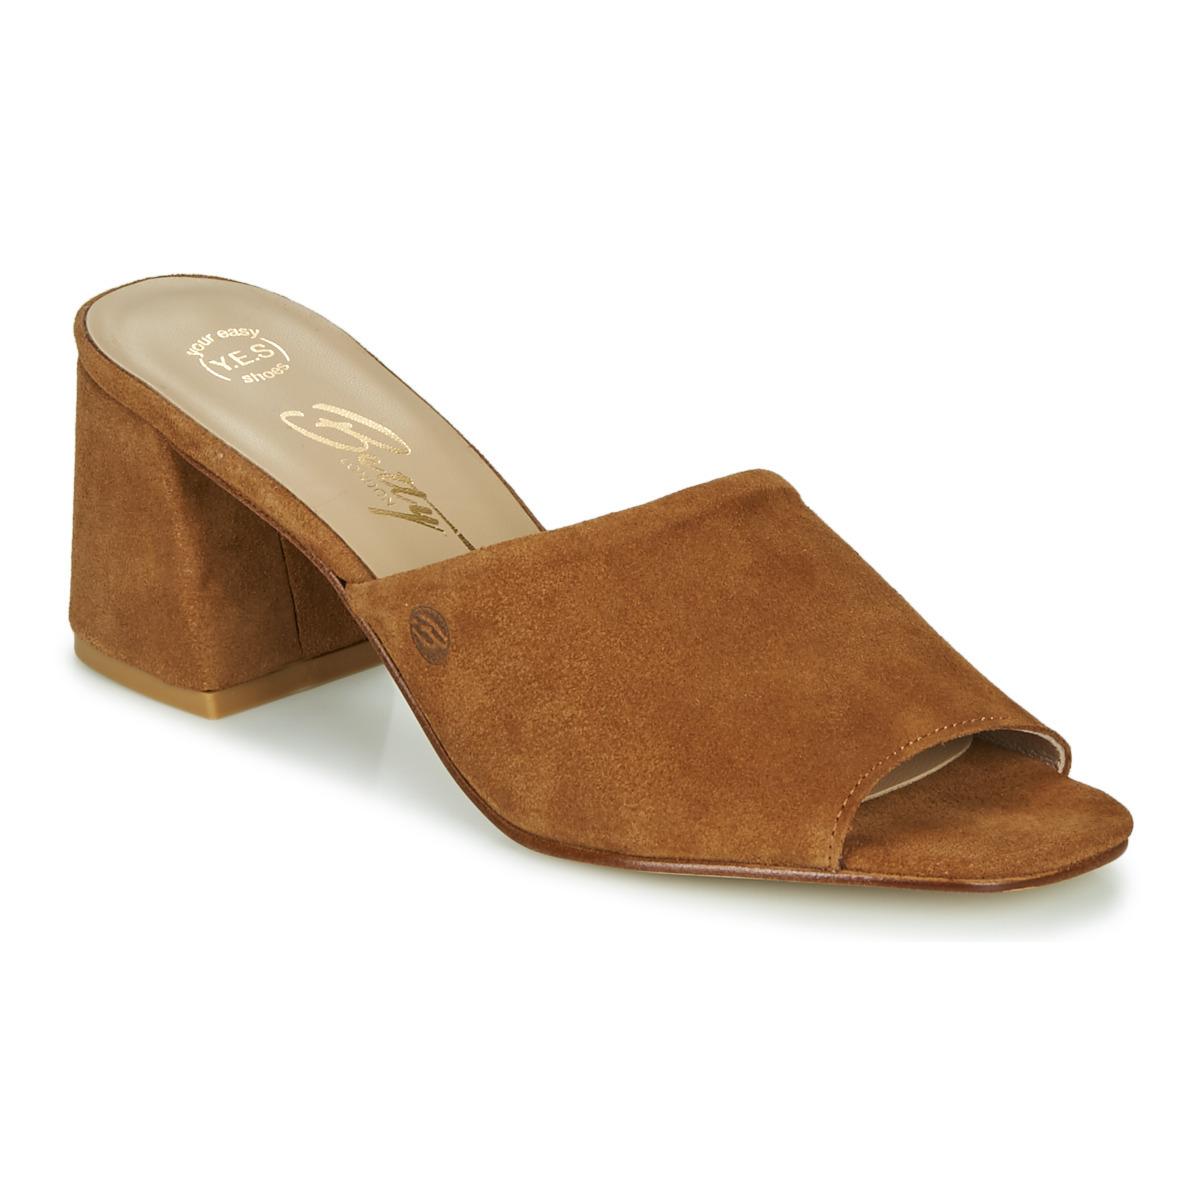 Betty London - Slippers in Brown - Spartoo Woman GOOFASH